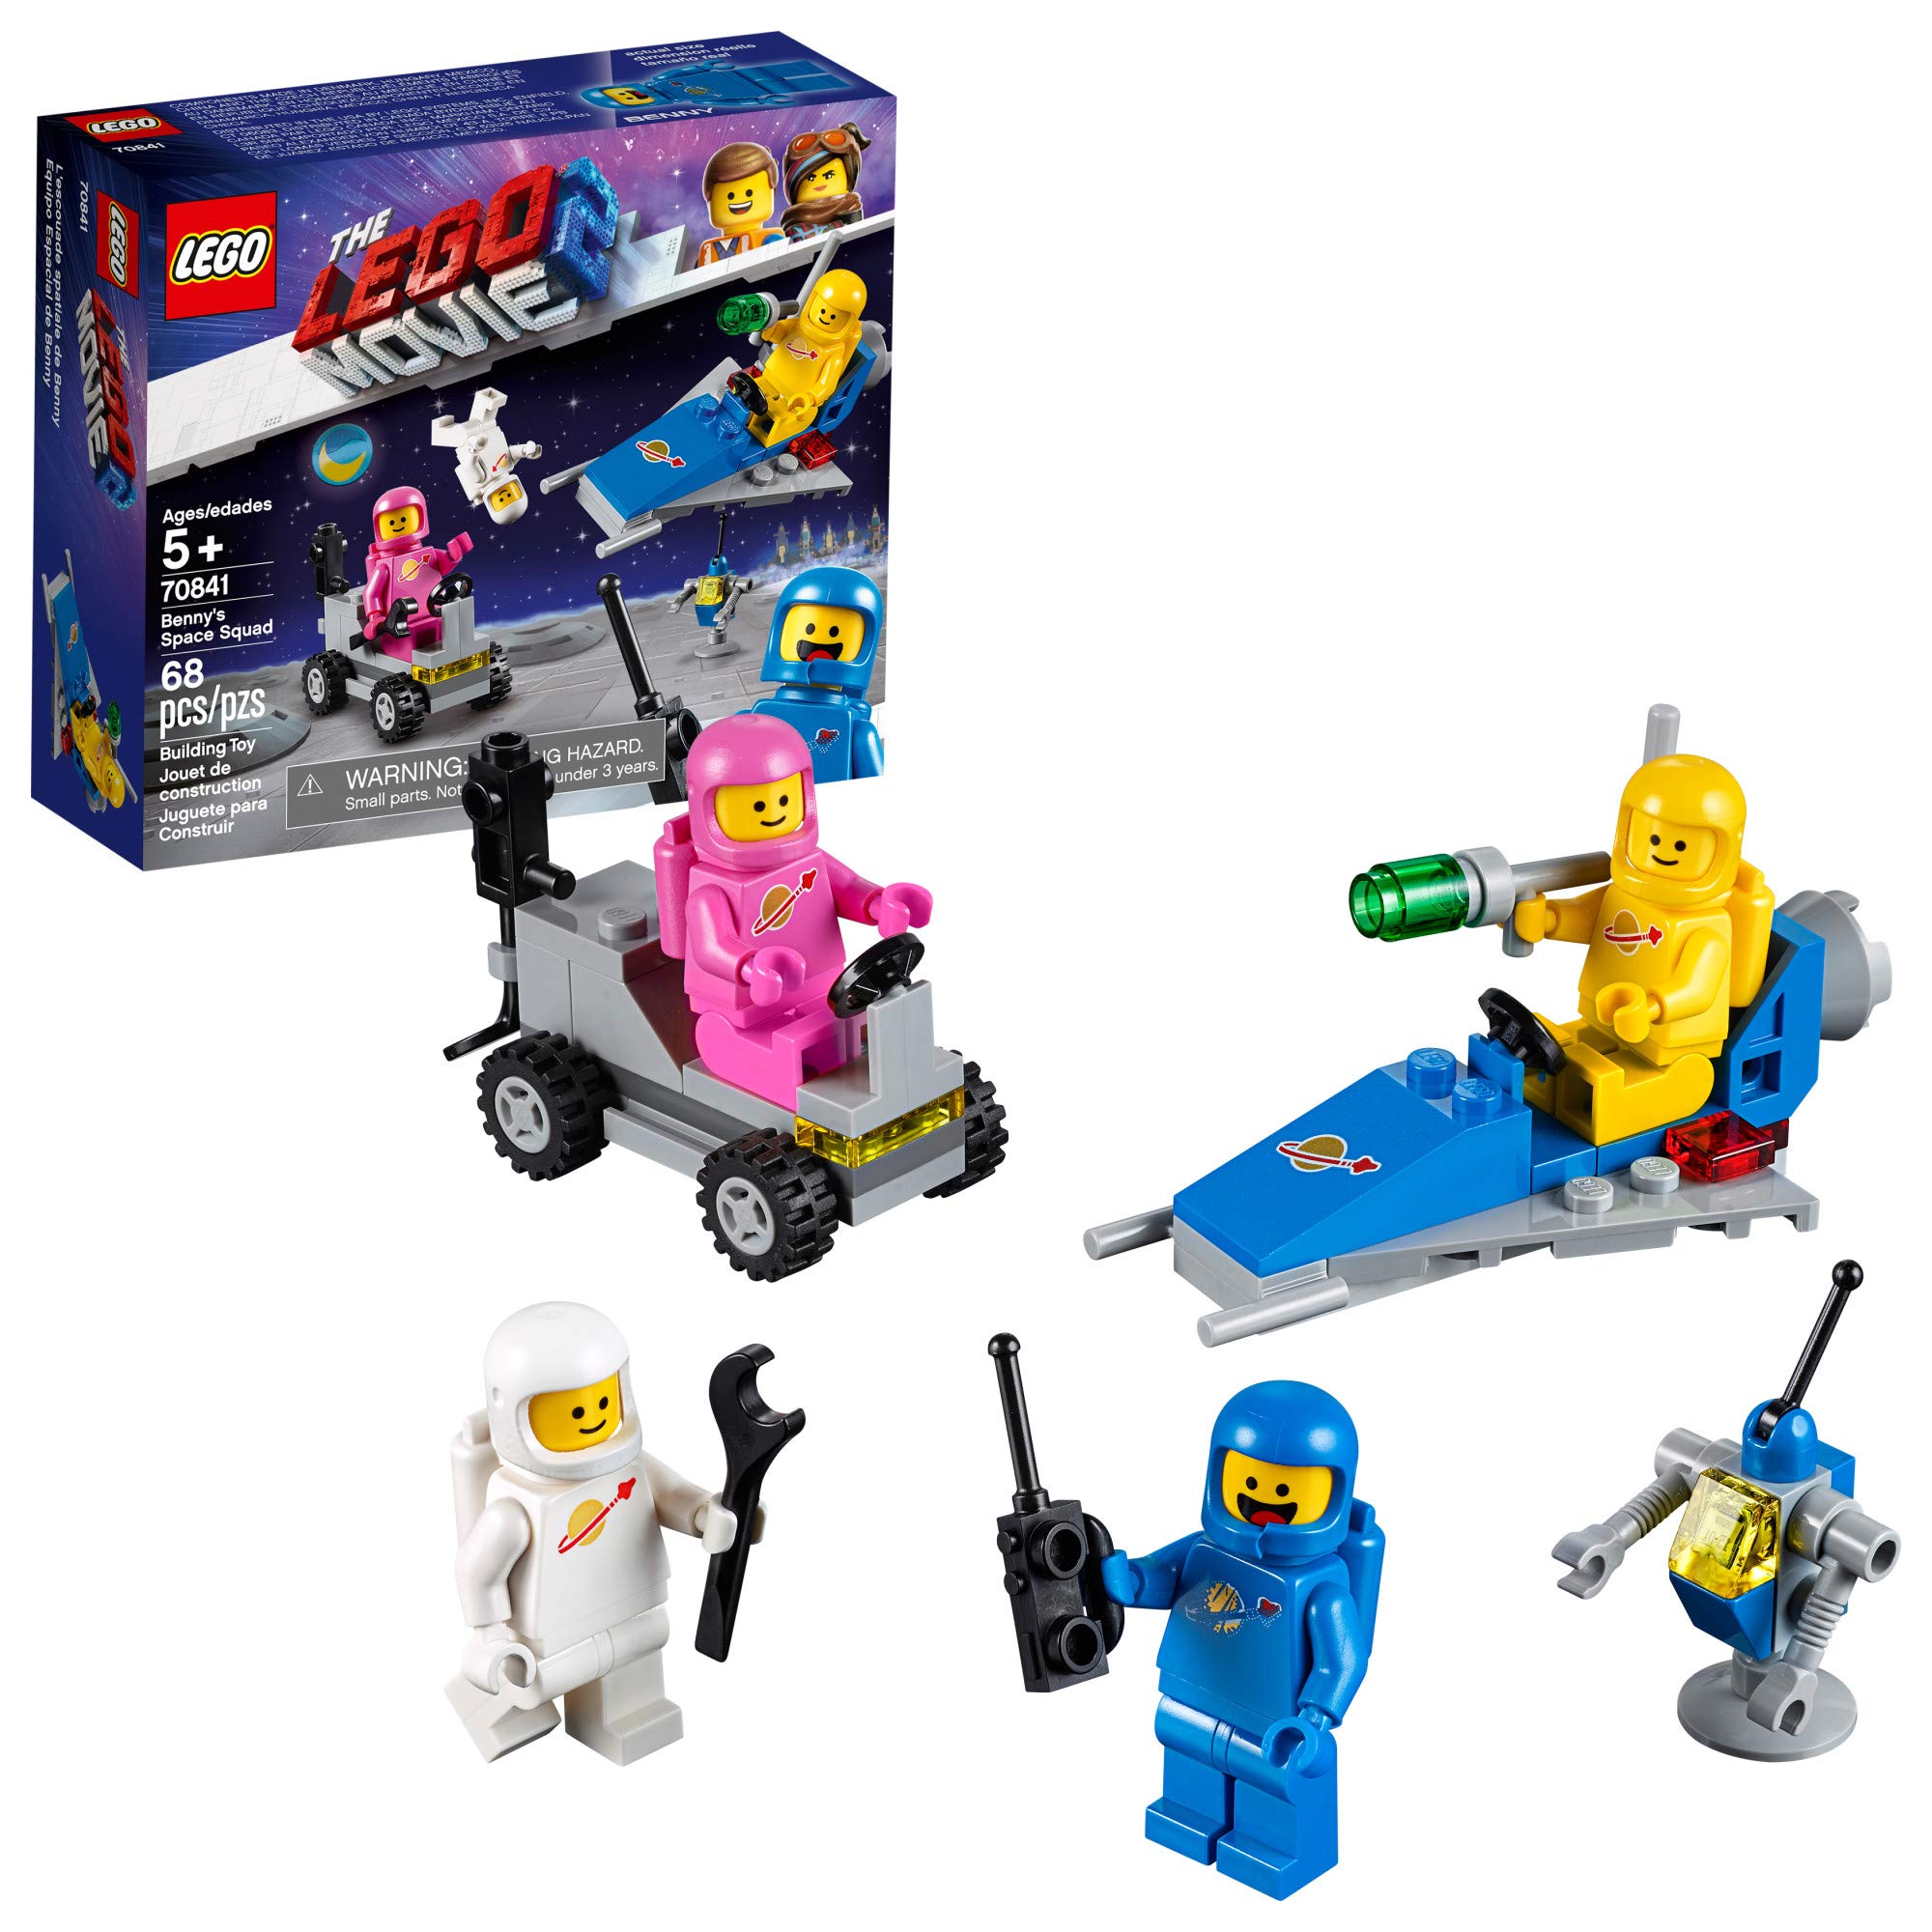 Book Cover LEGO THE LEGO MOVIE 2 Benny’s Space Squad 70841 Building Kit, Kids Playset with Space Toys and Astronaut Figures, New 2019 (68 Pieces)